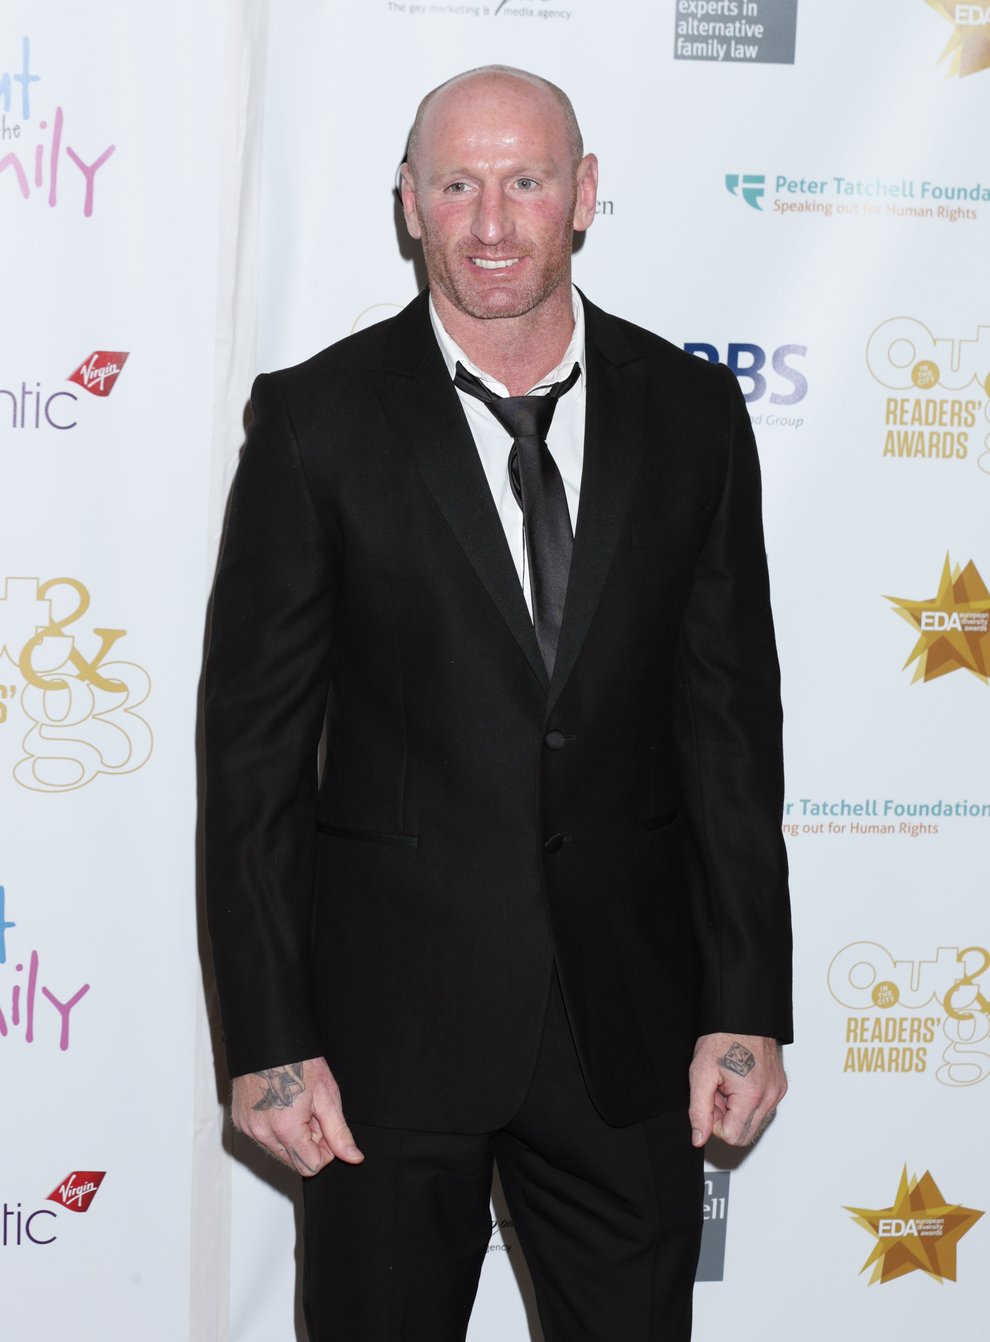 Former rugby player Gareth Thomas was named as this year’s Postcode Hero in recognition of his campaigning work (Yui Mok/PA)